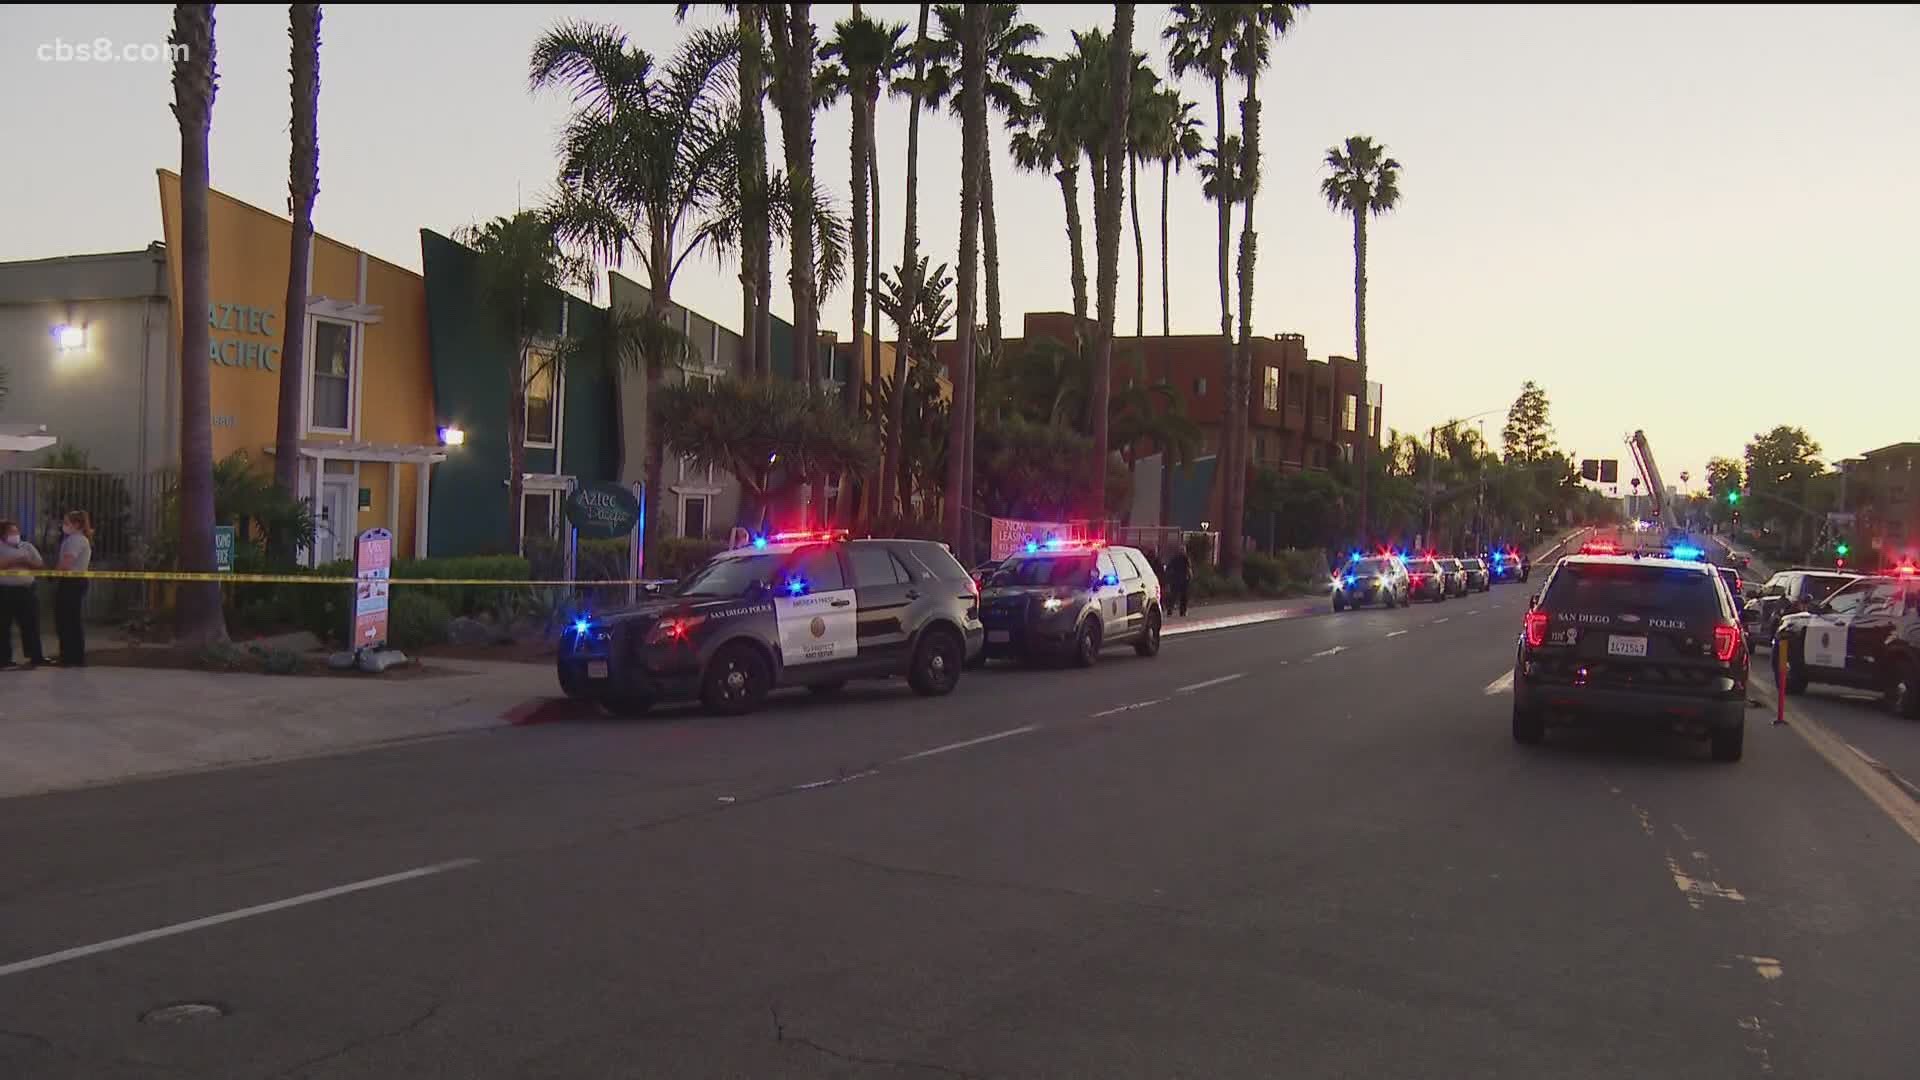 Two people were shot, one fatally, tonight in the College Area of San Diego.